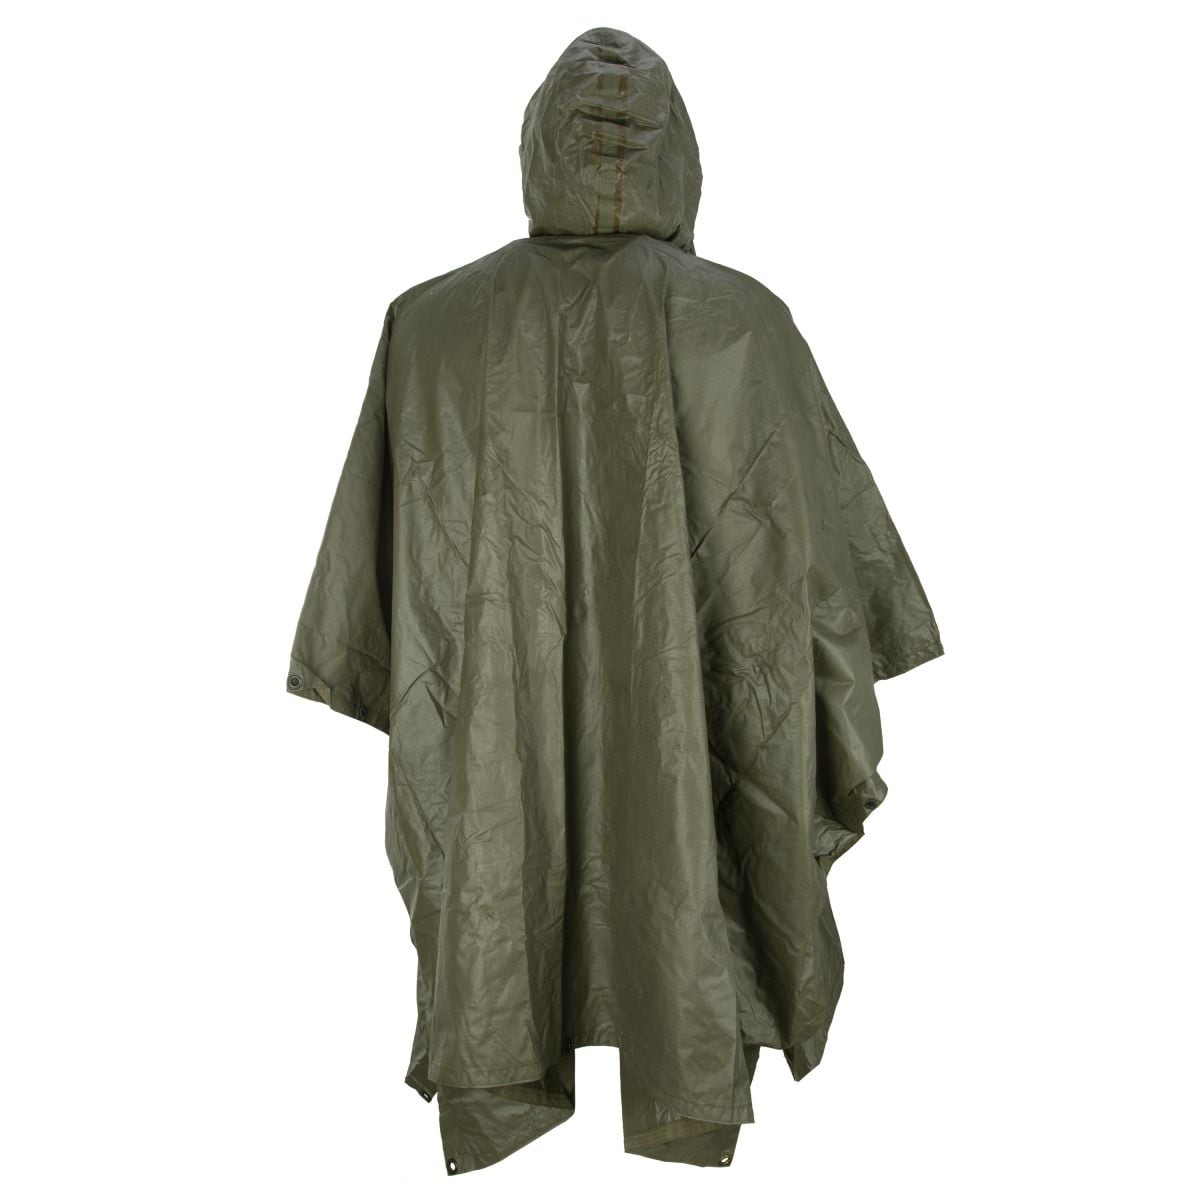 Purchase the German Army Poncho Used by ASMC